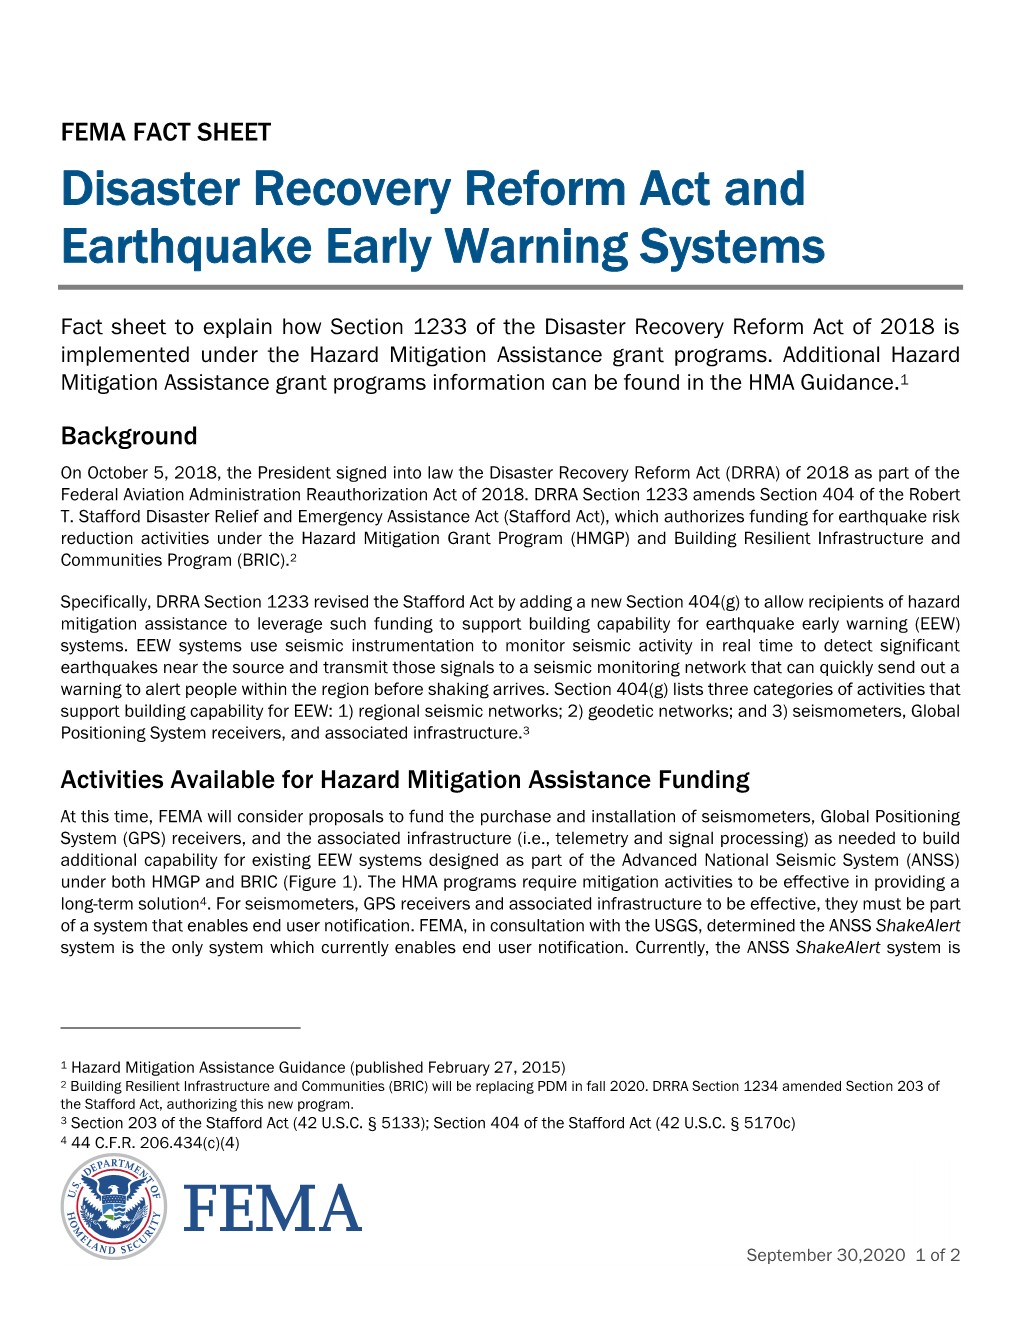 Disaster Recovery Reform Act and Earthquake Early Warning Systems